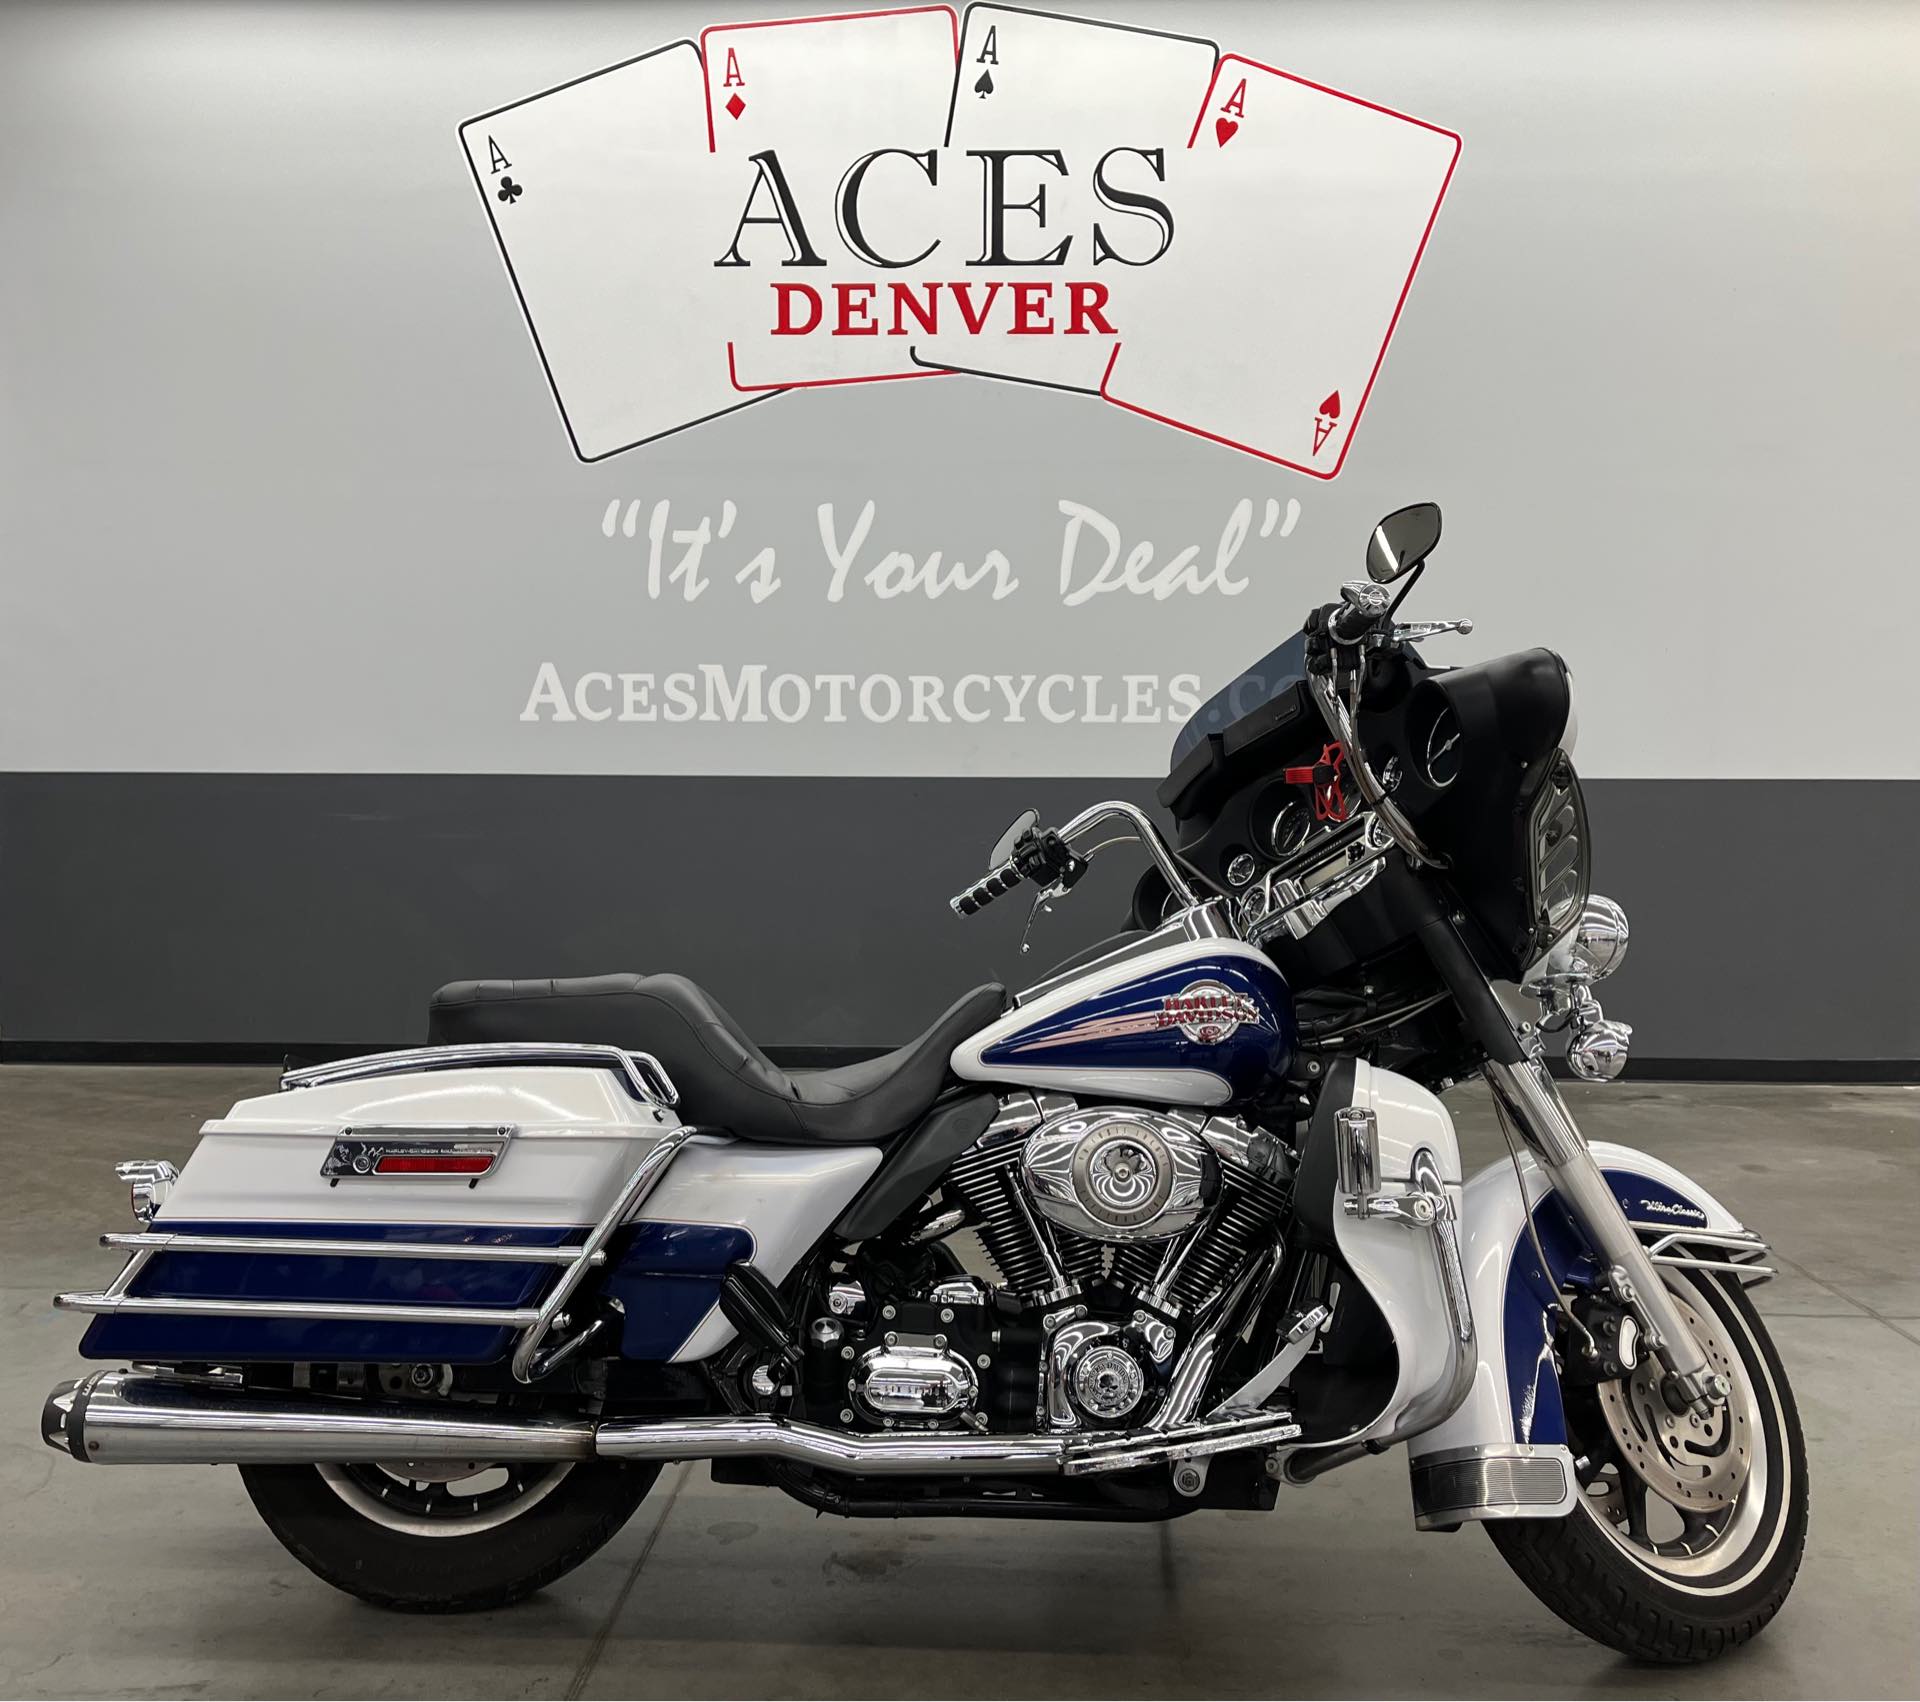 2007 Harley-Davidson Electra Glide Ultra Classic at Aces Motorcycles - Denver